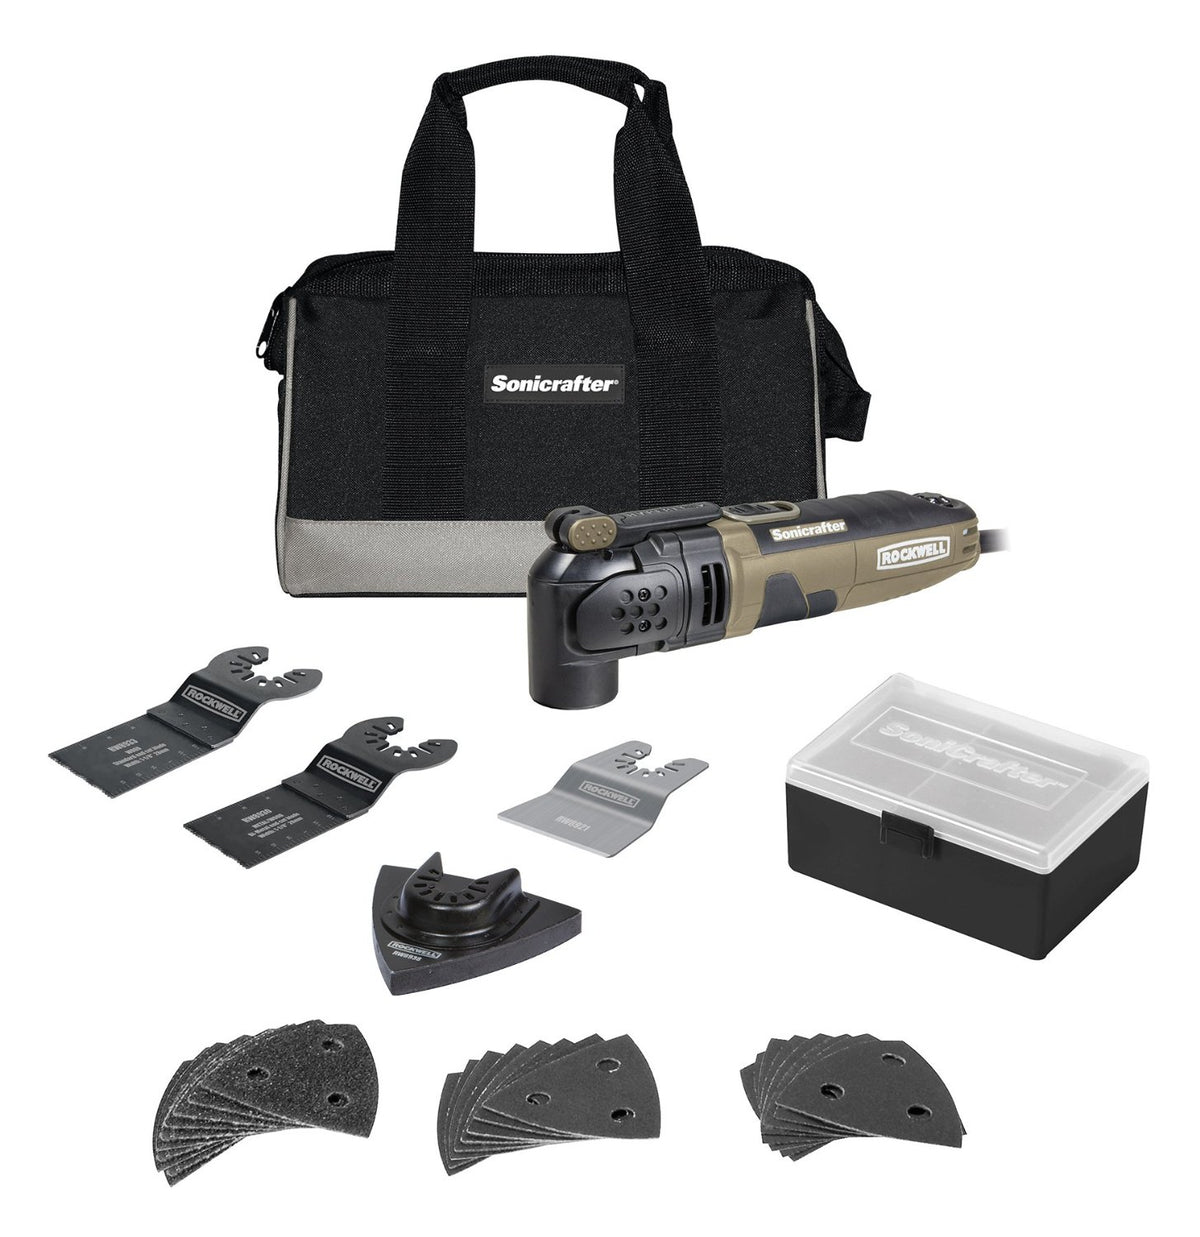 Rockwell RK5121K Sonicrafter Oscillating Tool Kit, 3 Amp